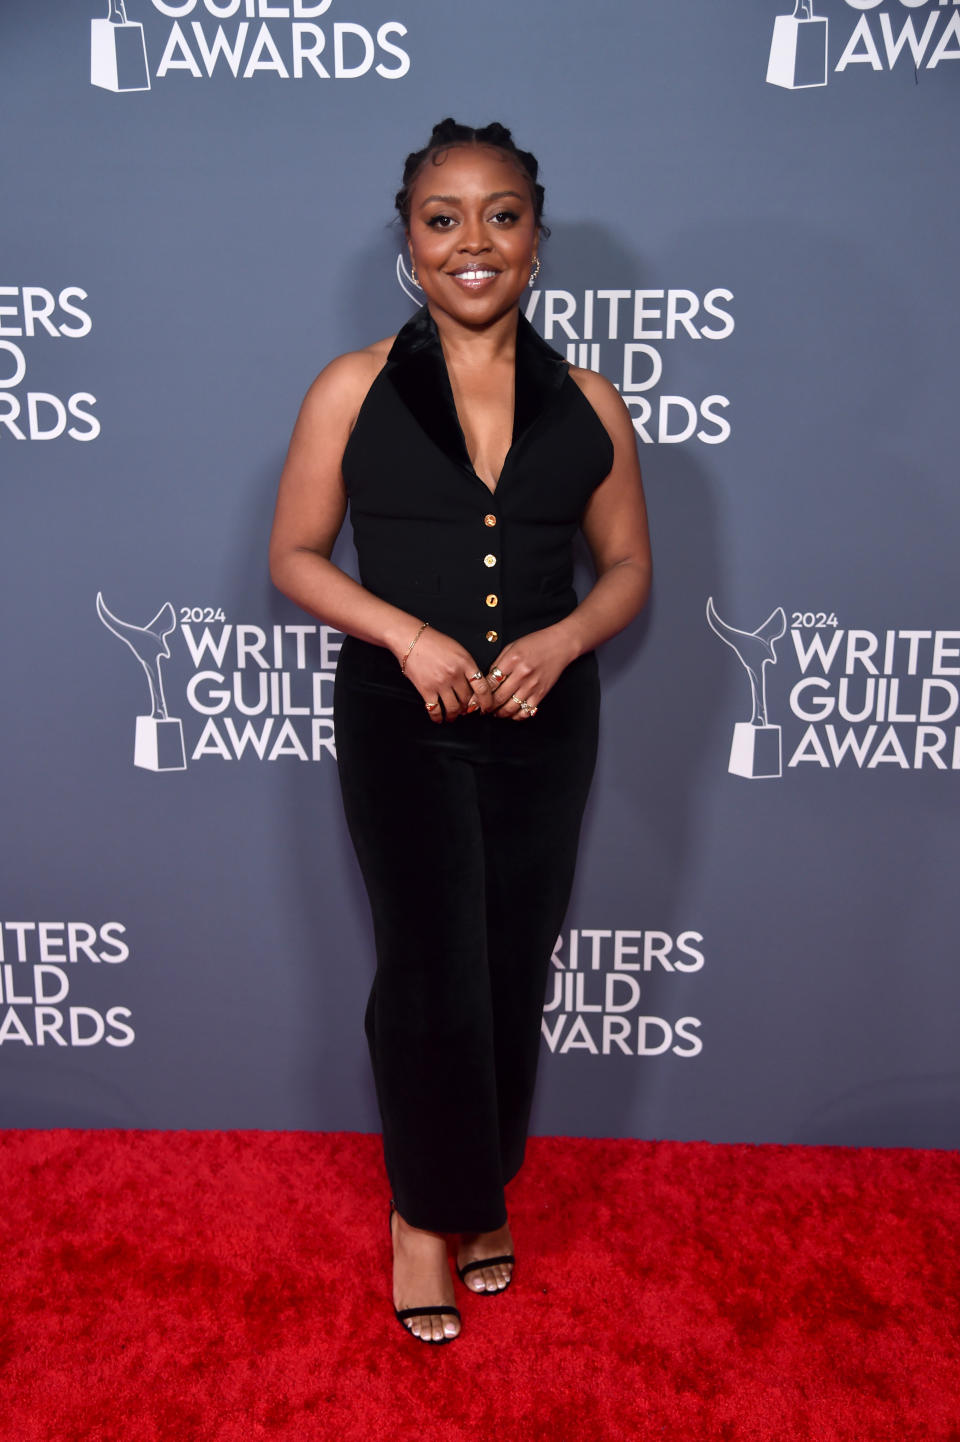 LOS ANGELES, CALIFORNIA - APRIL 14: Quinta Brunson attends the 2024 Writers Guild Awards Los Angeles Ceremony at the Hollywood Palladium on April 14, 2024 in Los Angeles, California. (Photo by Alberto E. Rodriguez/Getty Images for Writers Guild of America West)